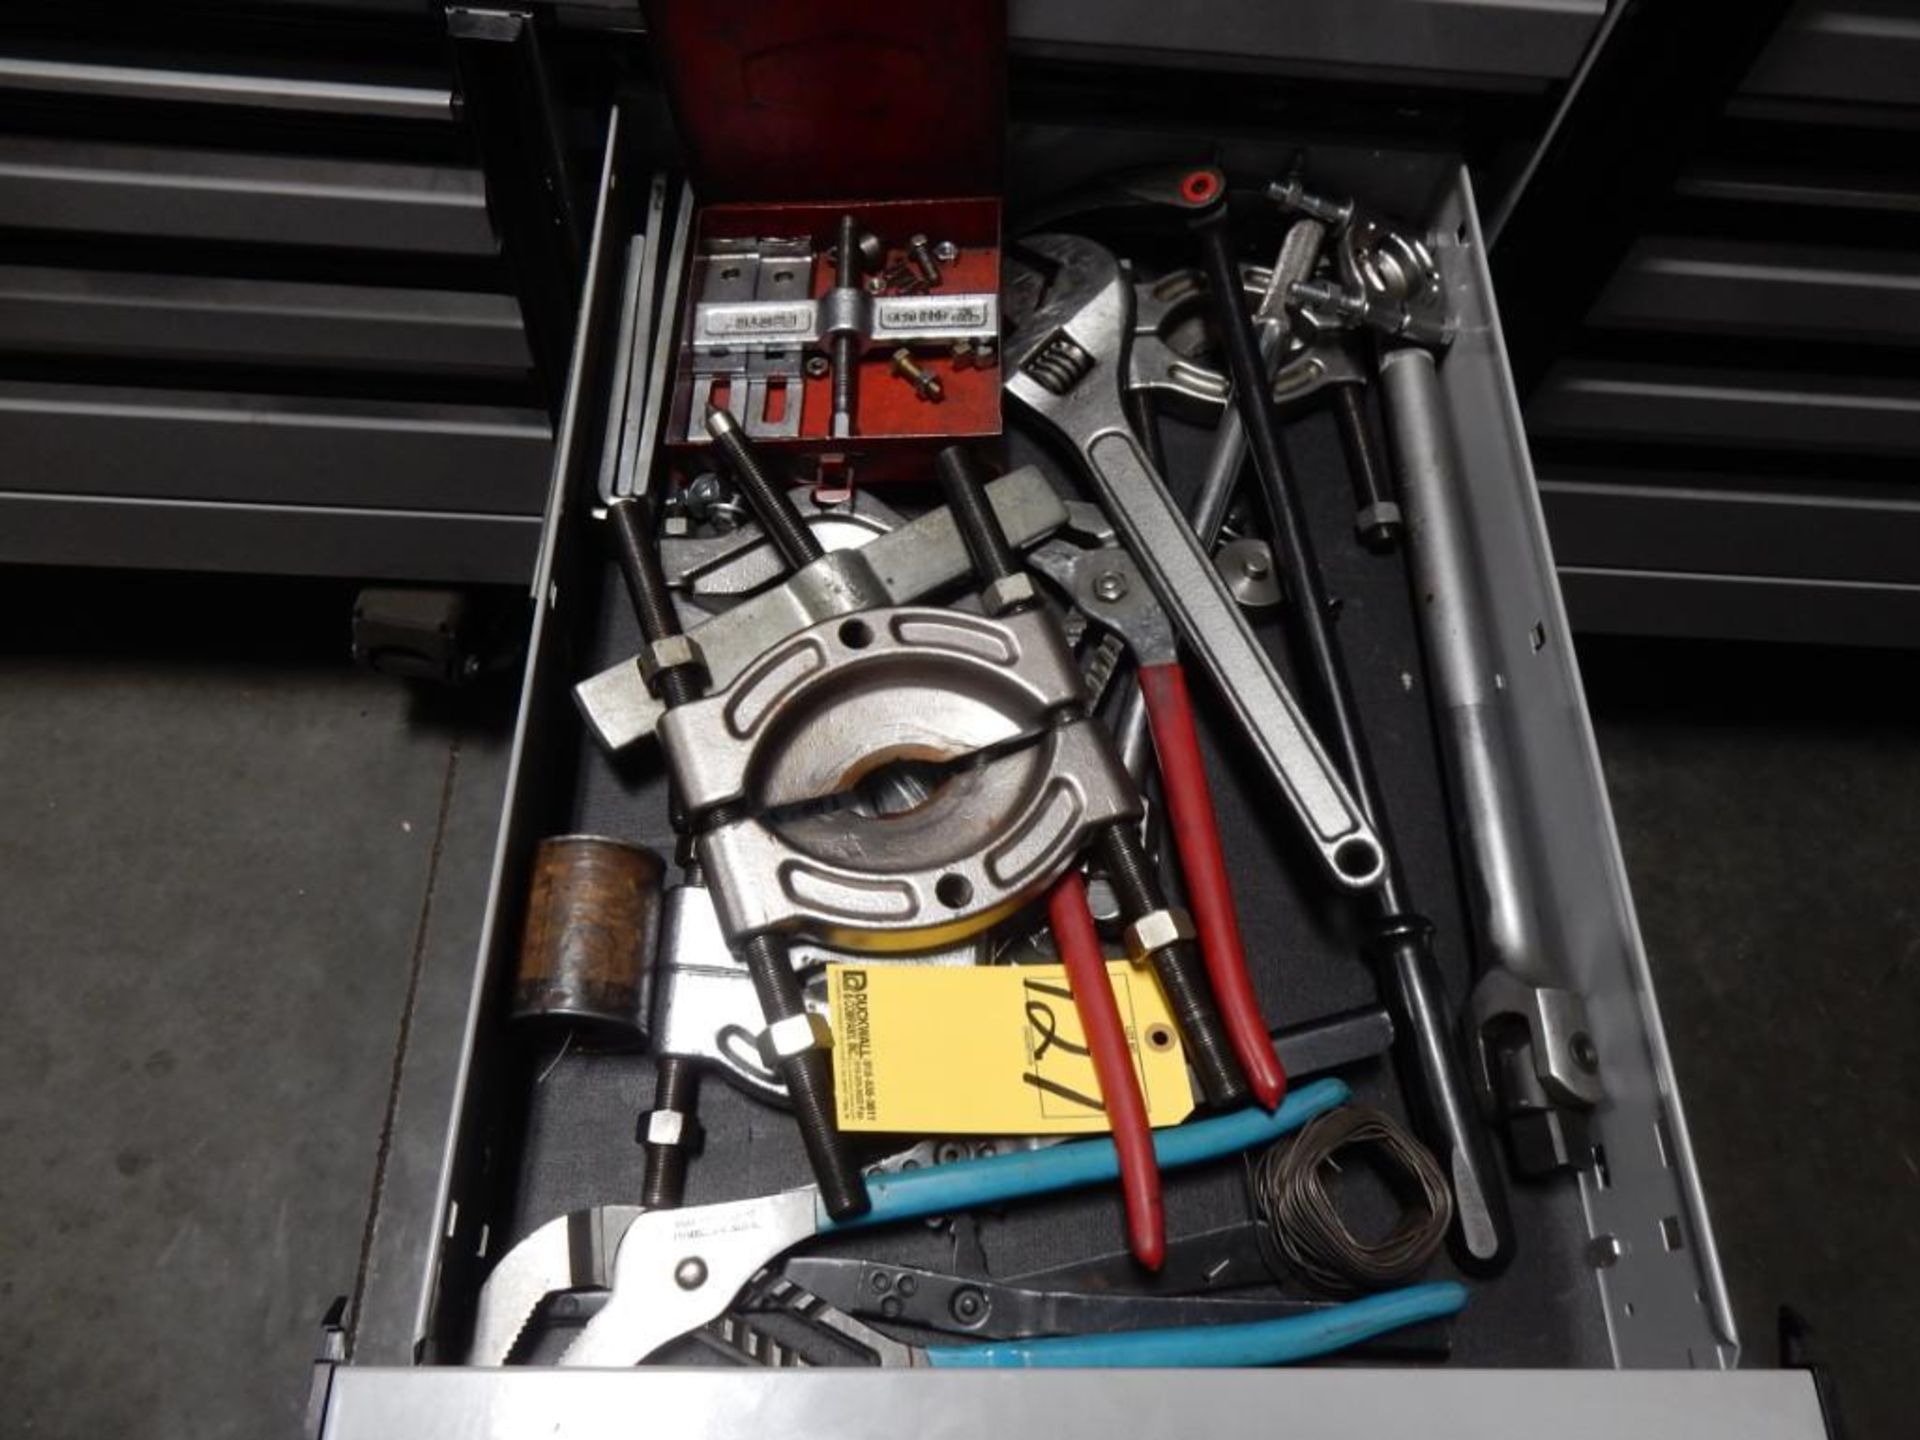 CONTENTS OF DRAWER - BEARING PULLERS, CHANNEL LOCKS, 1" BREAKOVER, CRESCENT WRENCH, ETC.